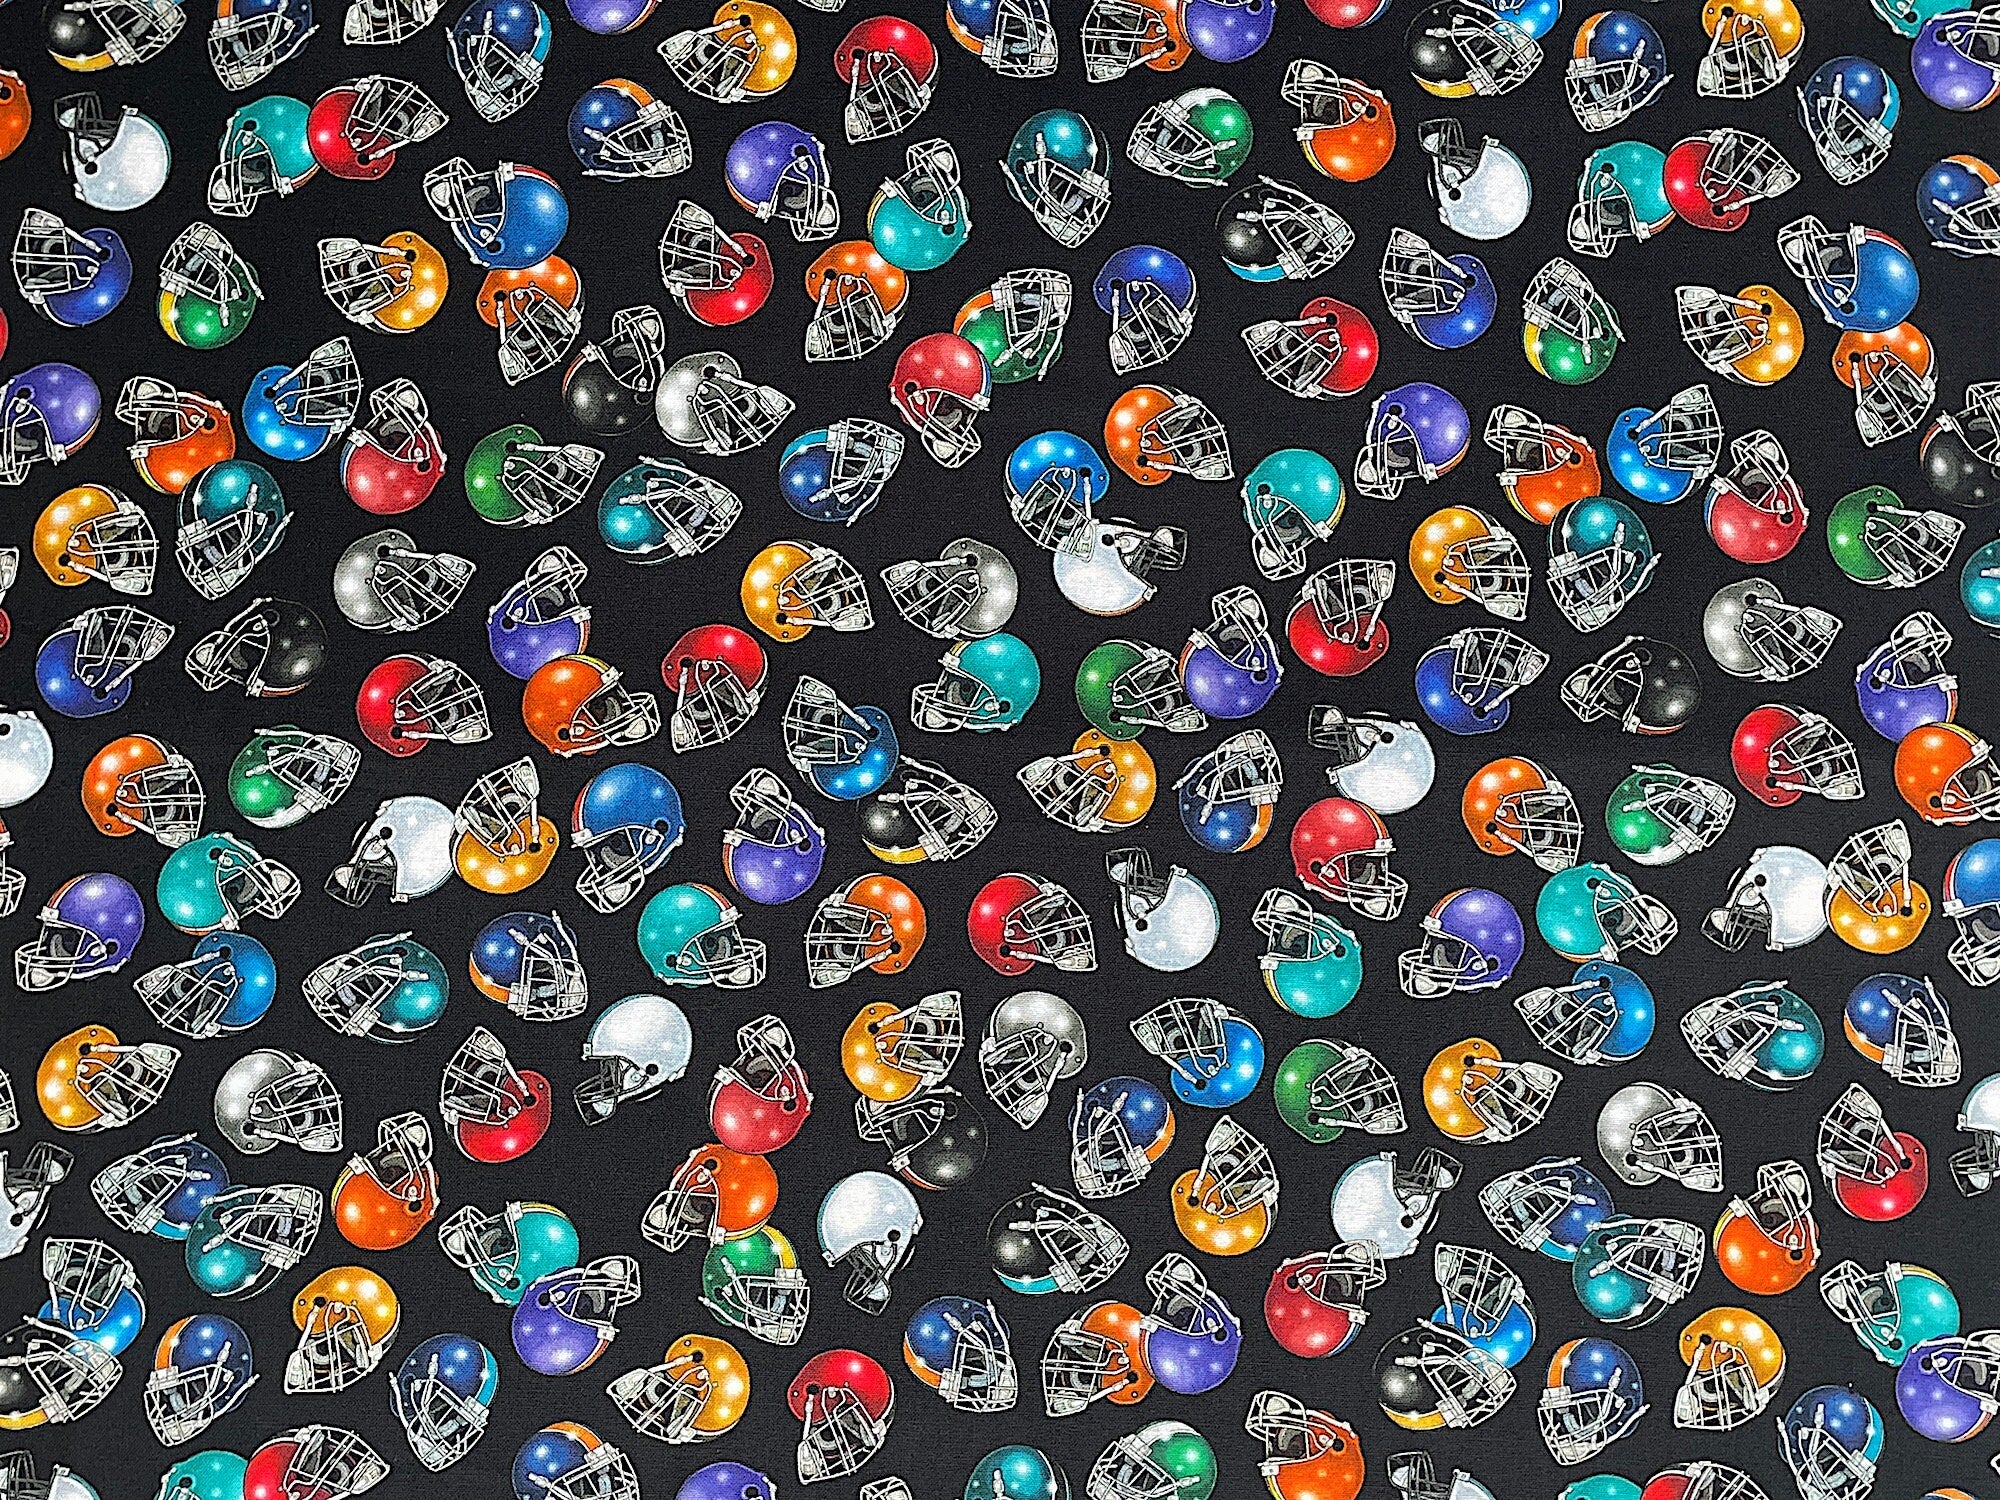 Black cotton fabric covered with white, blue, green red and yellow football helmets.